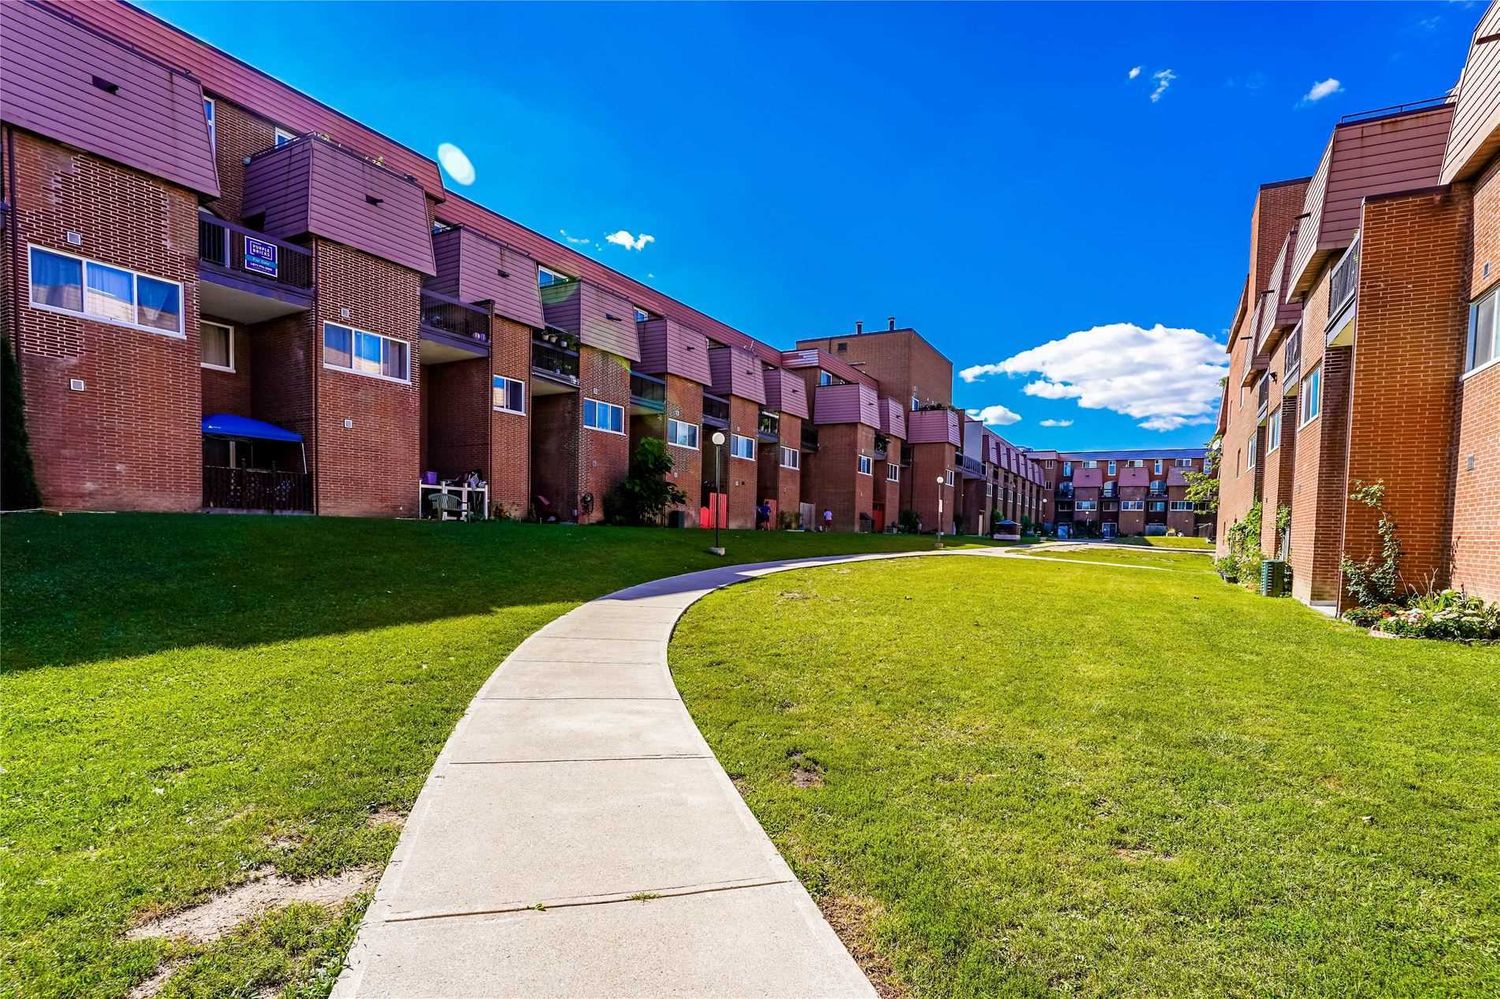 1335-1455 Williamsport Dr. This condo townhouse at 1335-1455 Williamsport Drive Condos is located in  Mississauga, Toronto - image #2 of 2 by Strata.ca